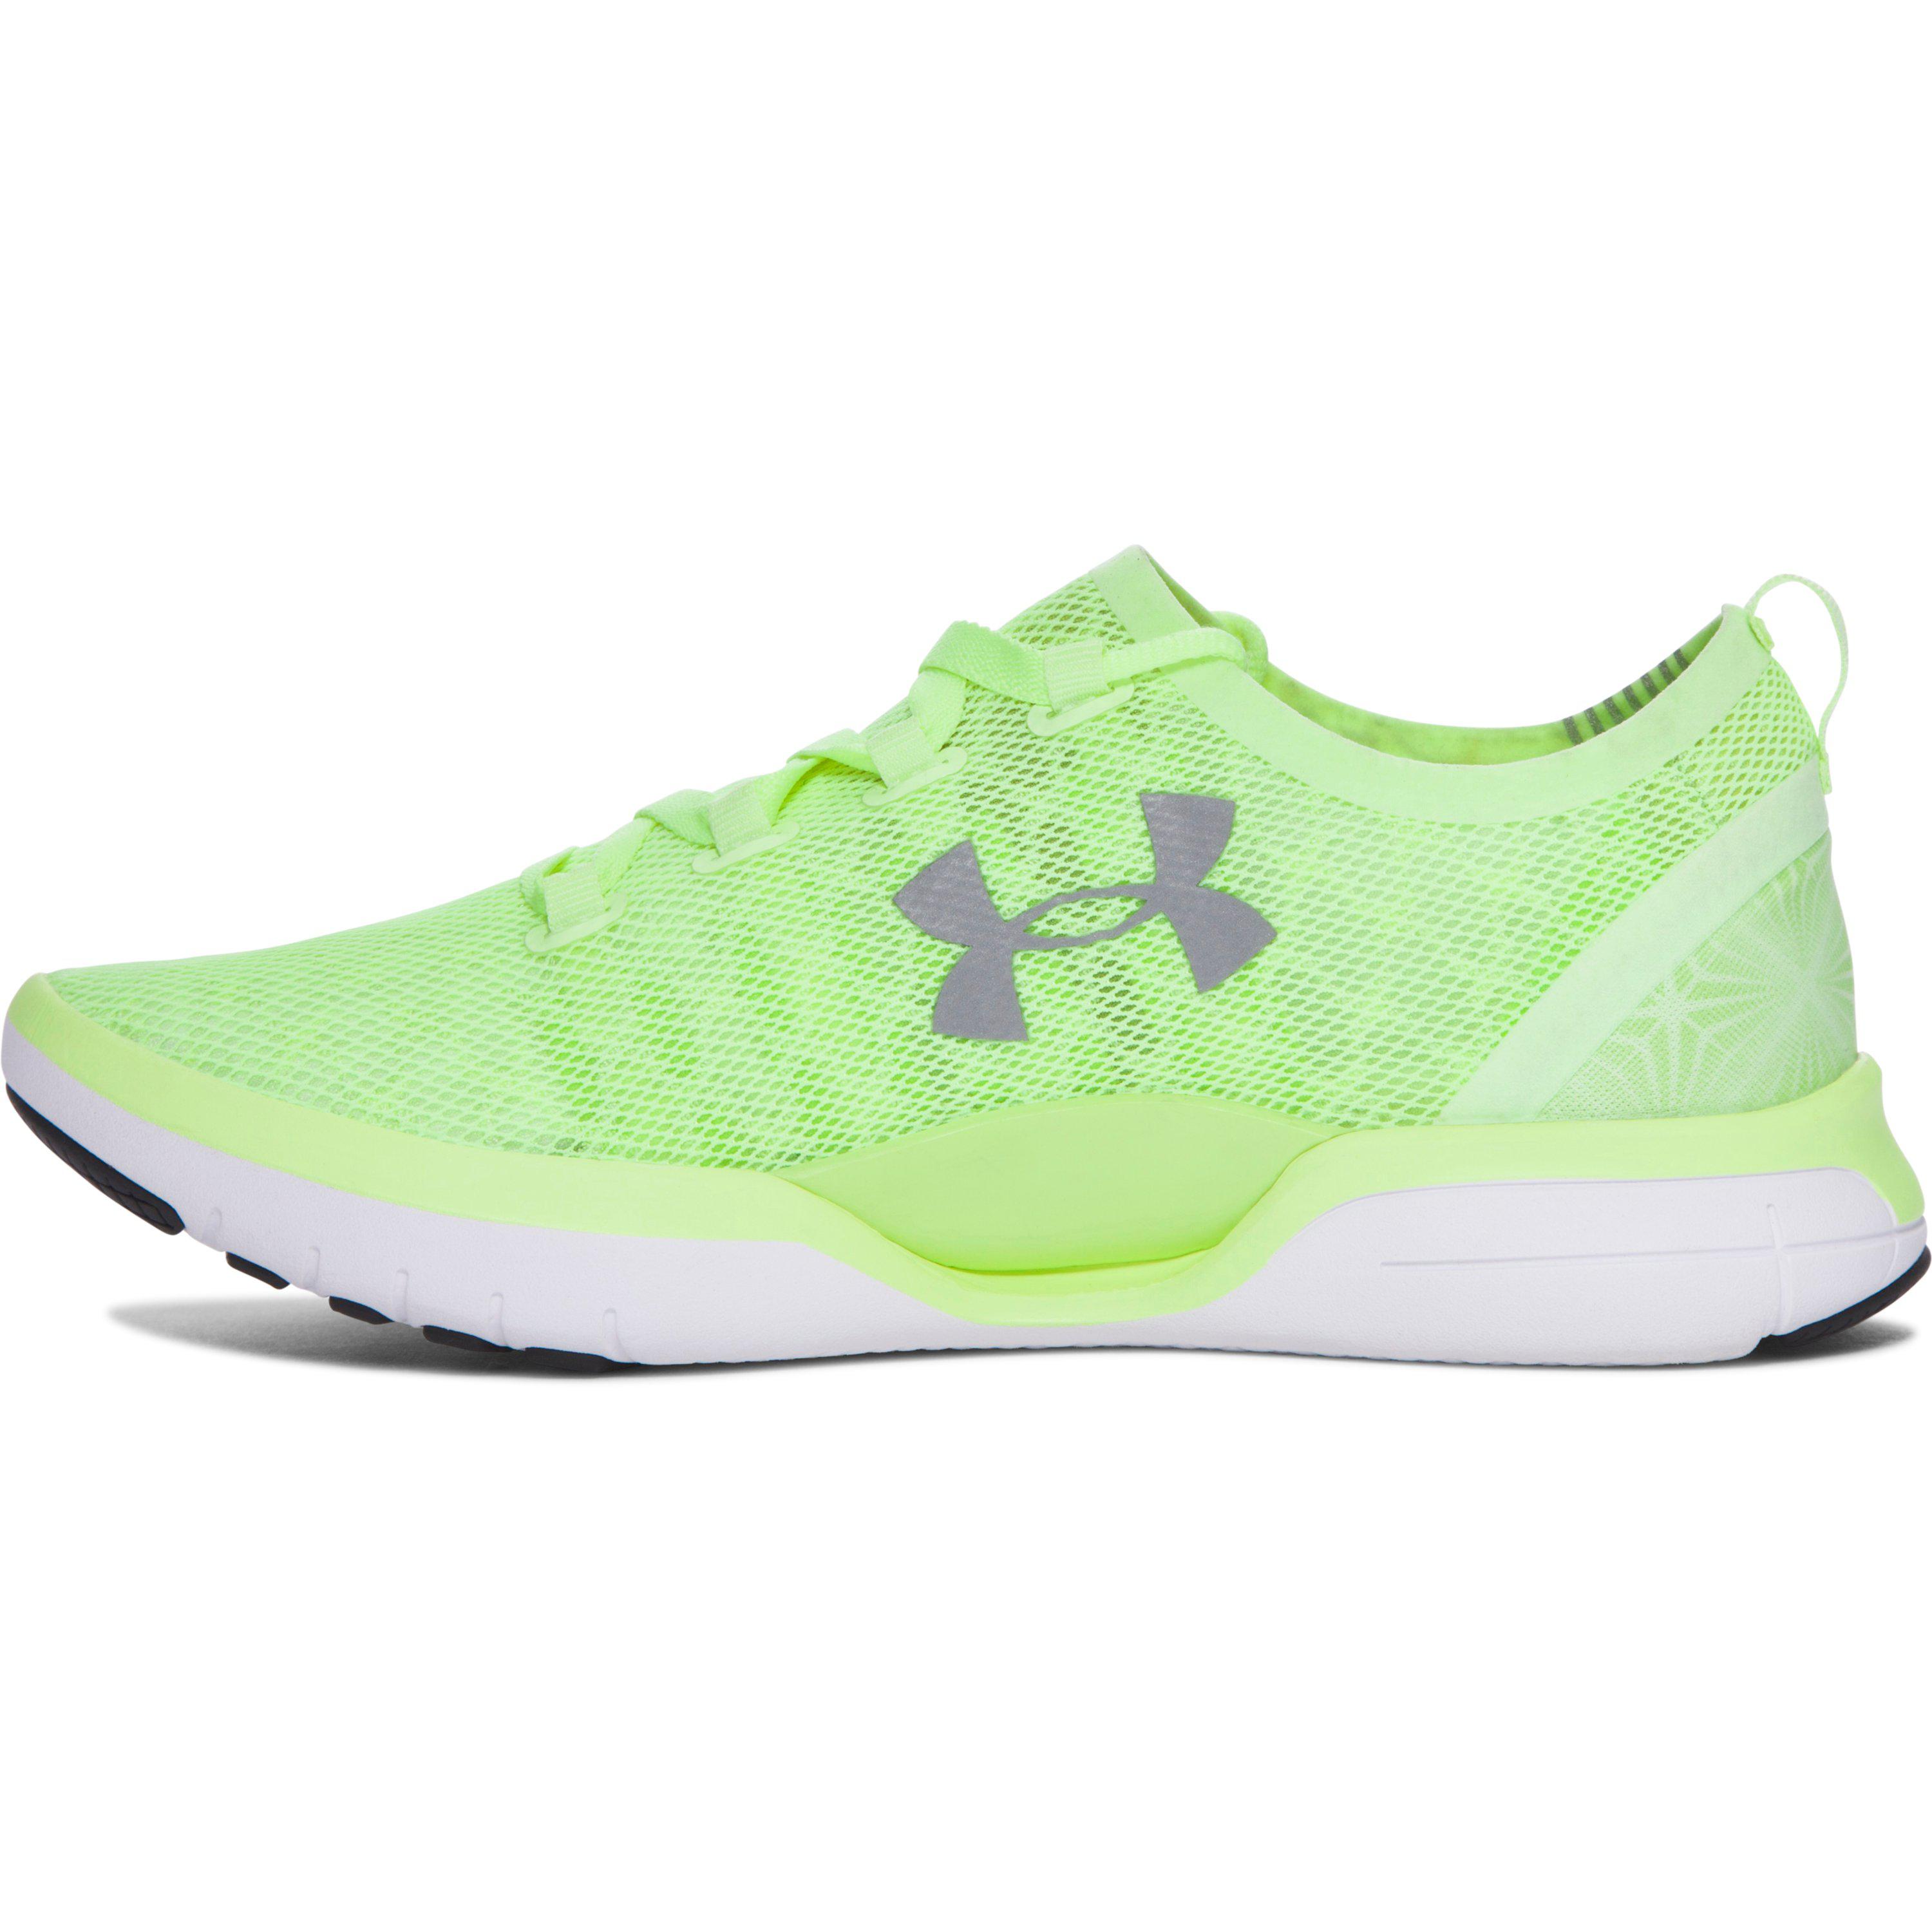 Under Armour Rubber Women's Ua Charged Coolswitch Running Shoes in ...